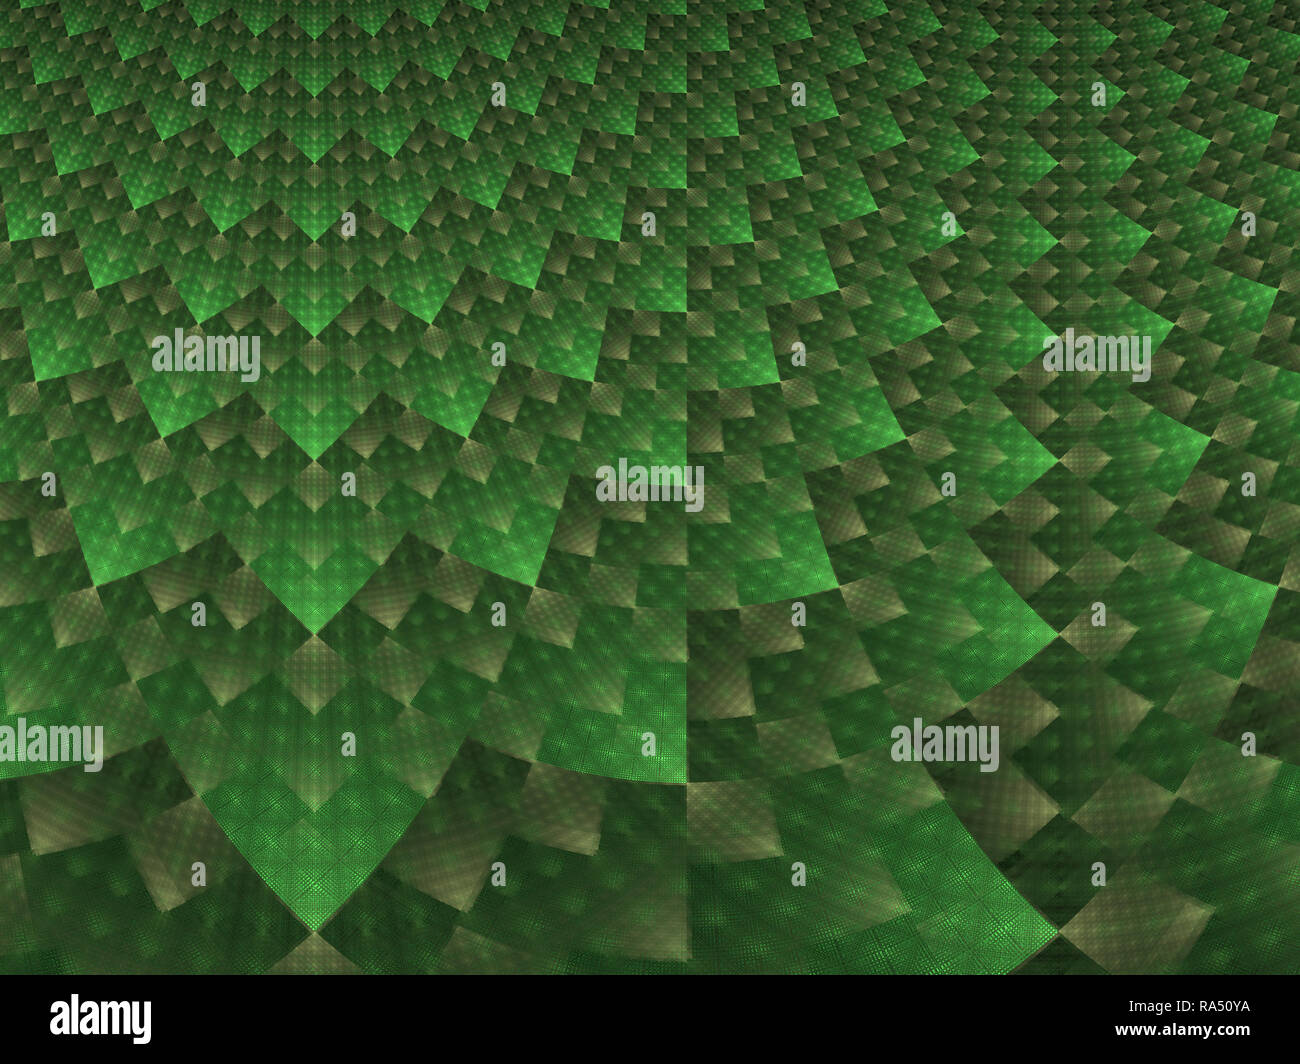 Green and White Squares Abstract Geometrical Digital Art Flame Fractal Stock Photo